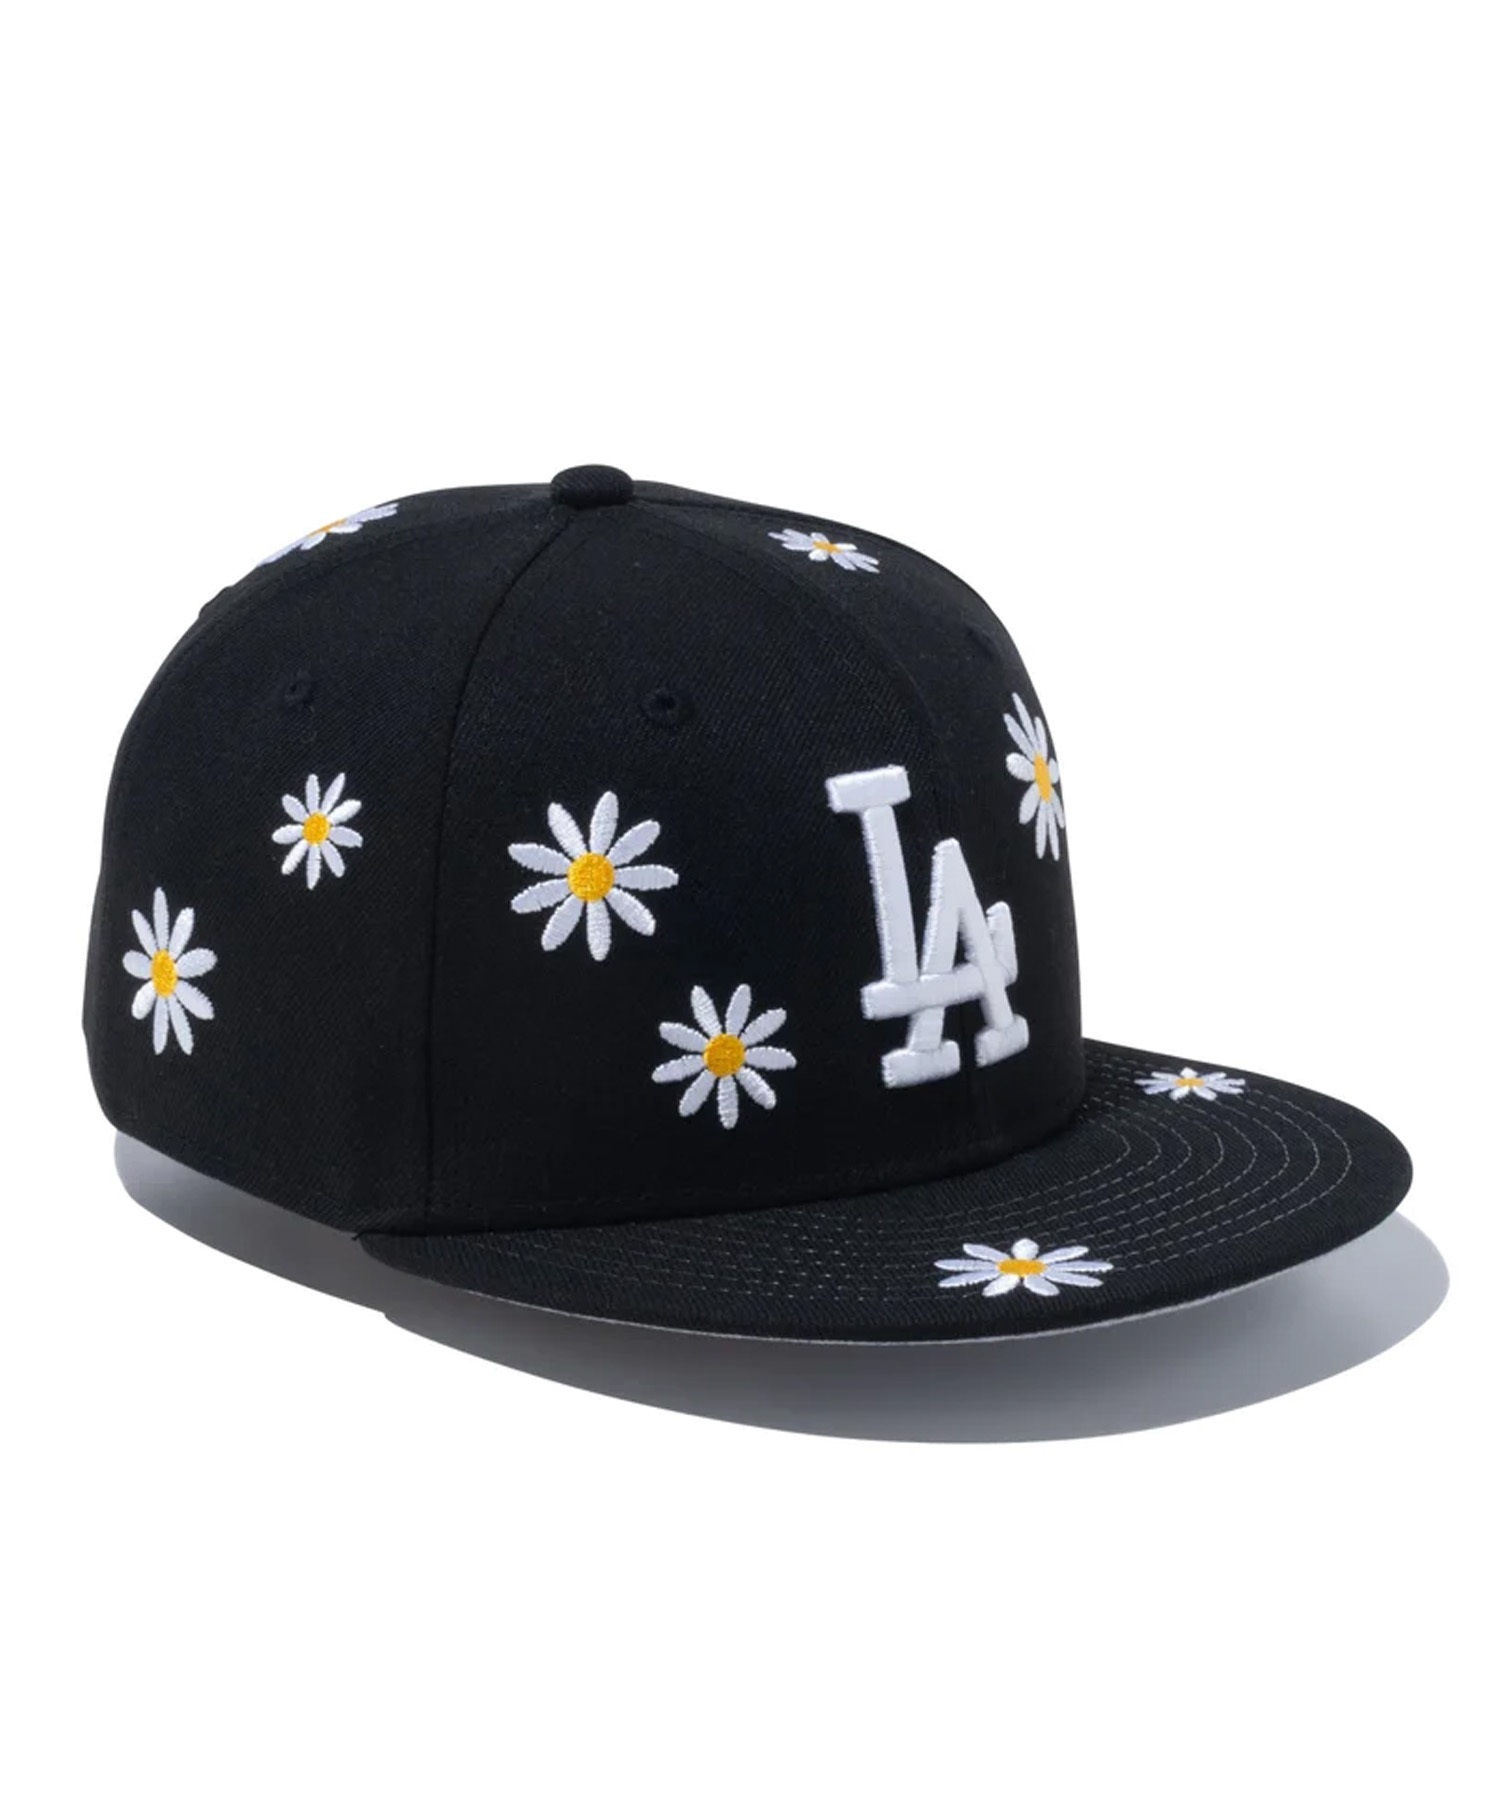 NEW ERA ニューエラ Youth 9FIFTY MLB Flower Embroidery